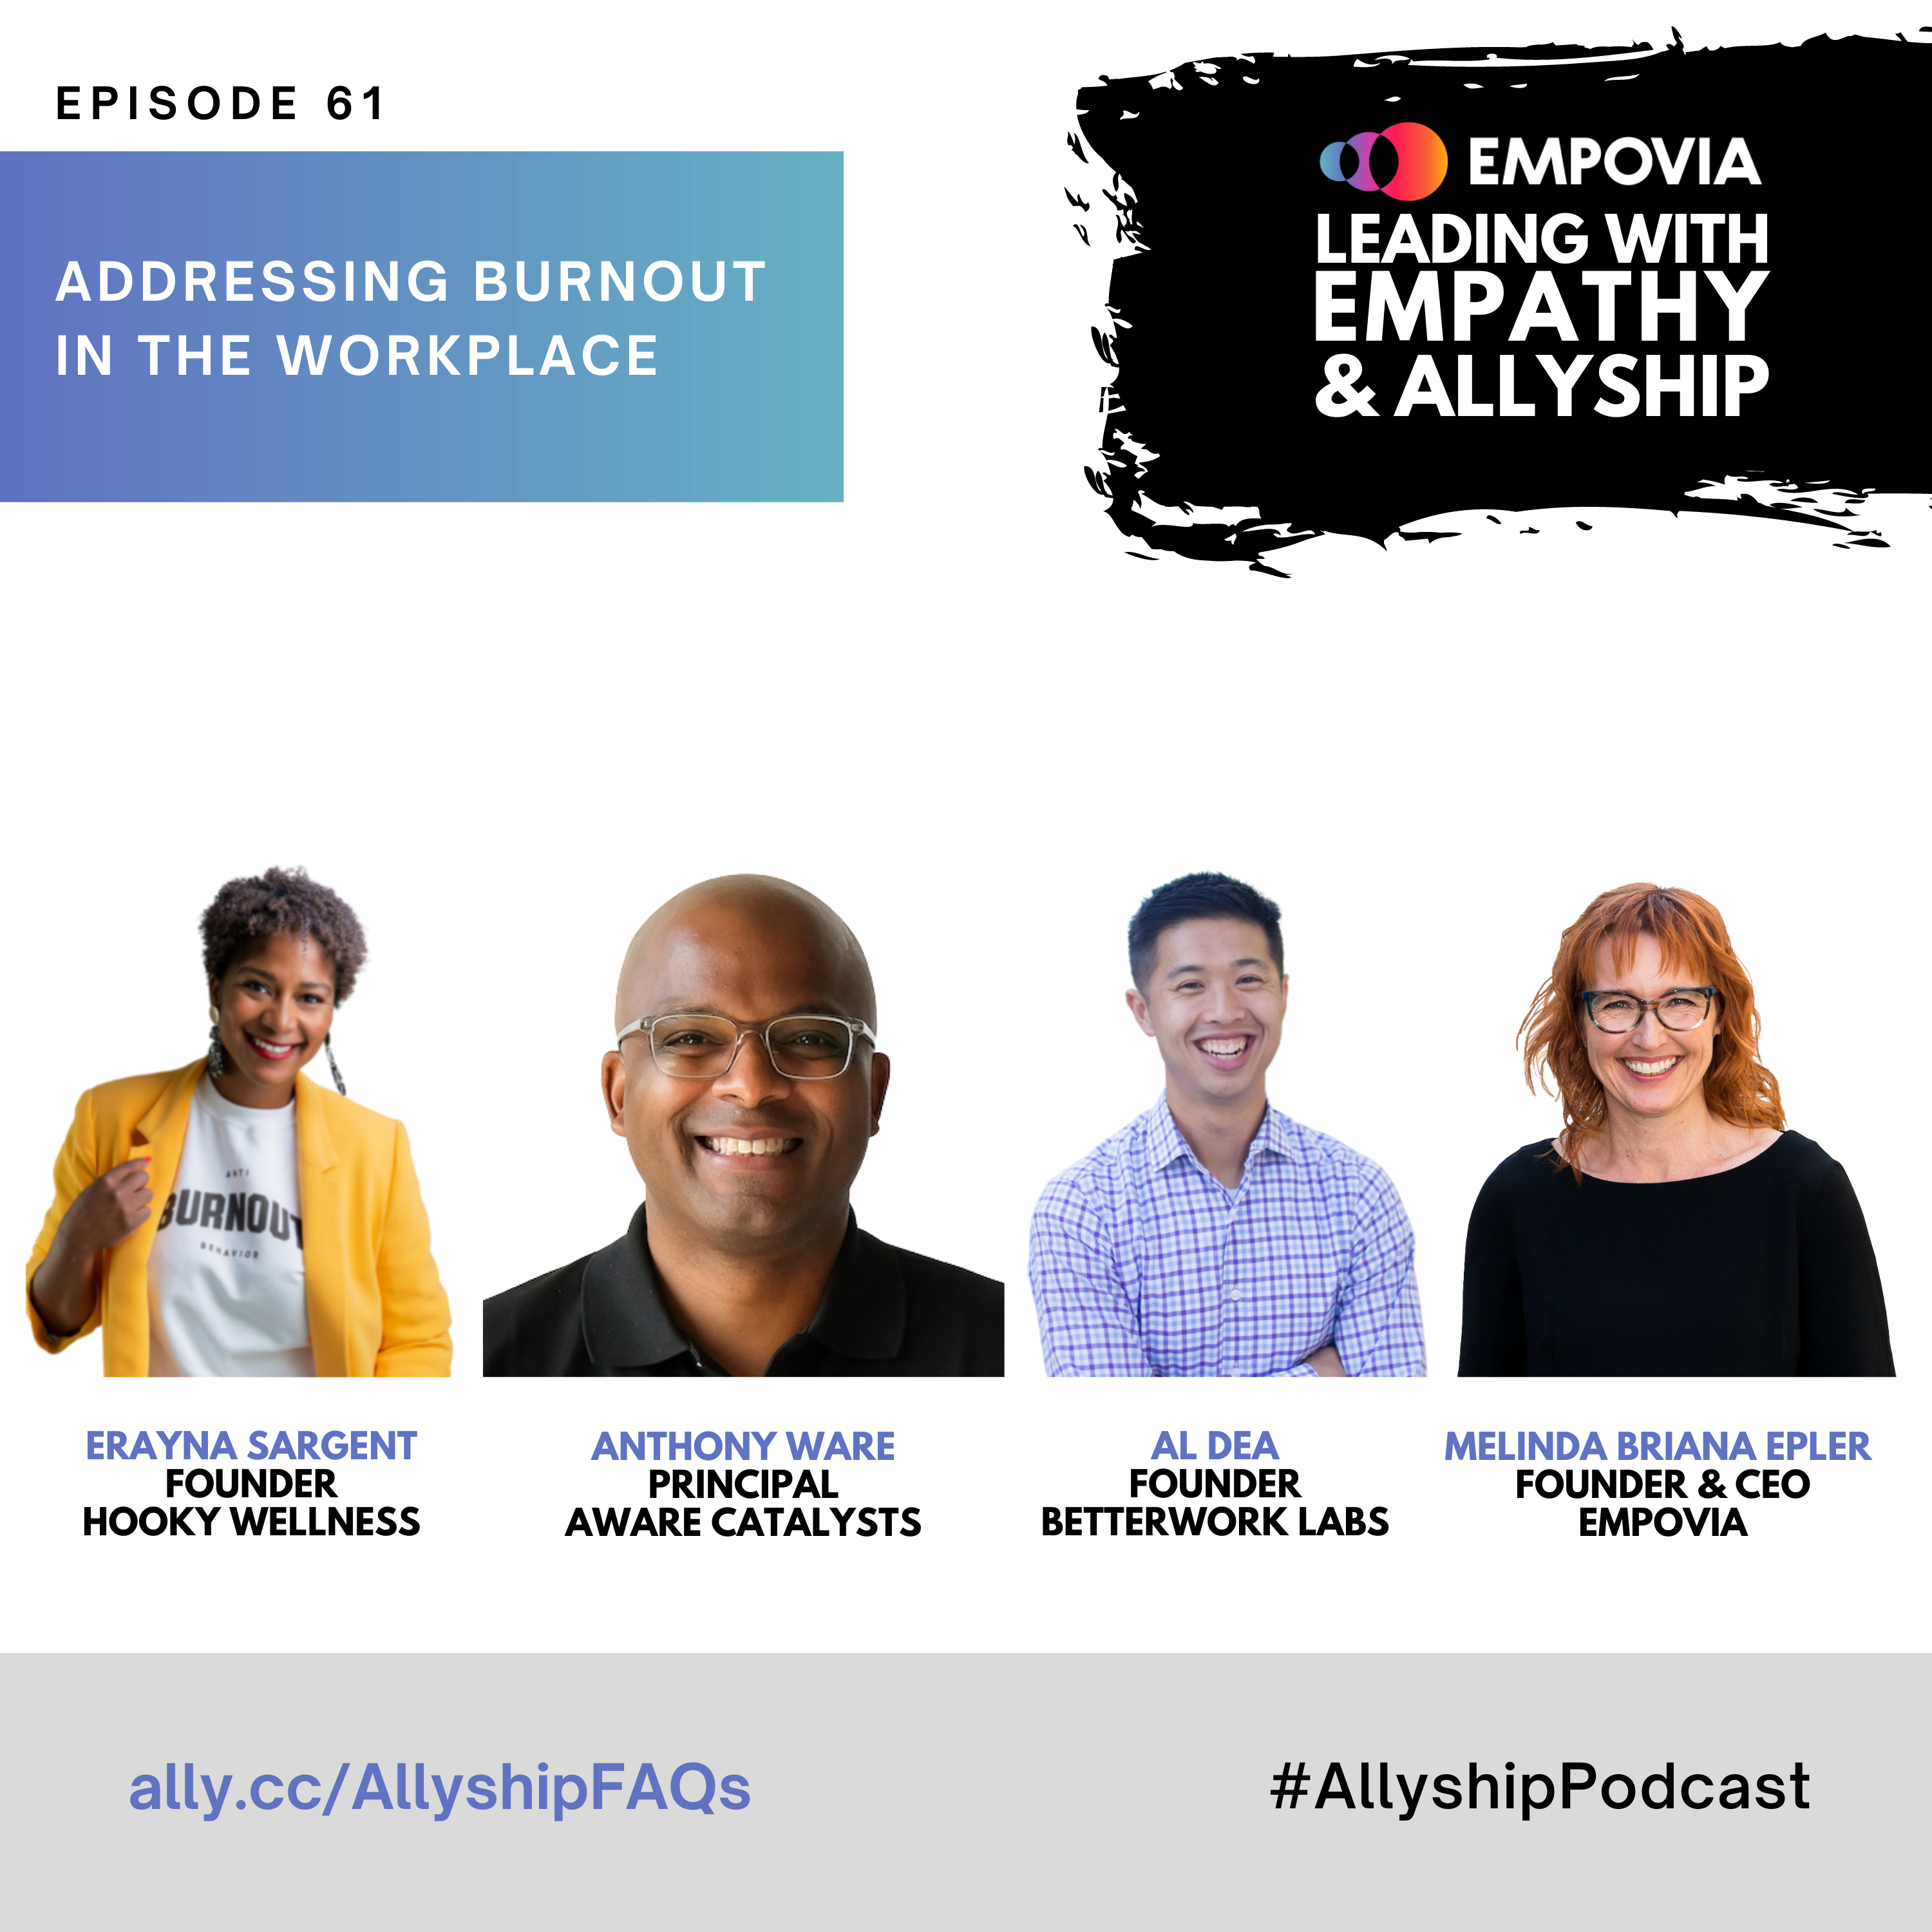 Leading With Empathy & Allyship promo with the Empovia logo and photos of Erayna Sargent; a Black woman in a yellow cardigan and white printed t-shirt; Anthony Ware; a Black man, African-American, bald, wearing glasses; Al Dea; an Asian man in a light blue plaid shirt; and host Melinda Briana Epler; a White woman with red hair, glasses, and a black shirt.